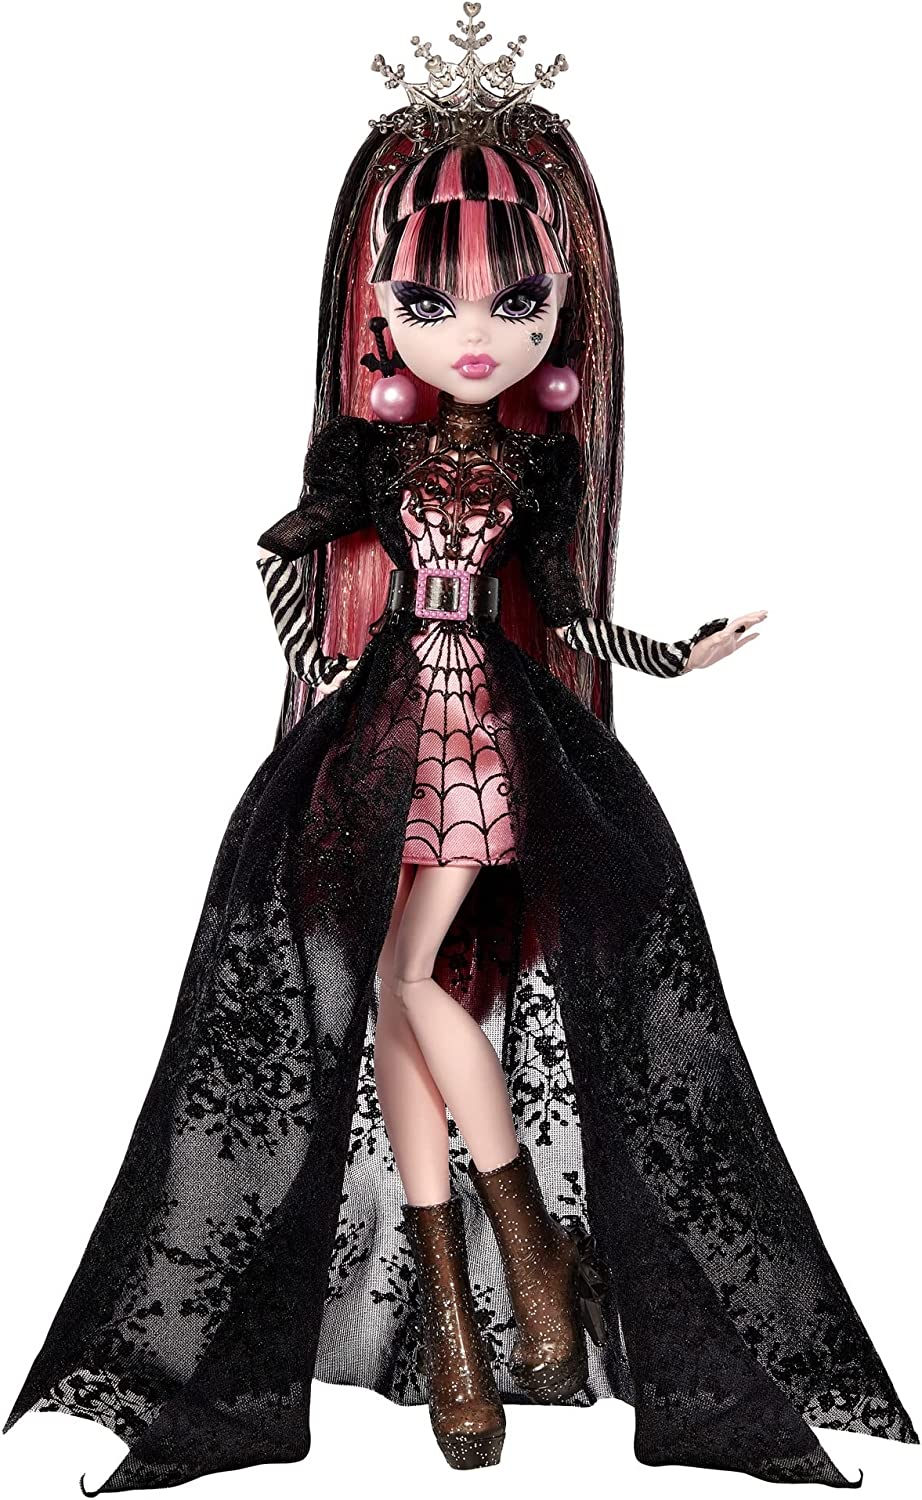 Monster High Howliday Winter Edition Draculaura doll - YouLoveIt.com